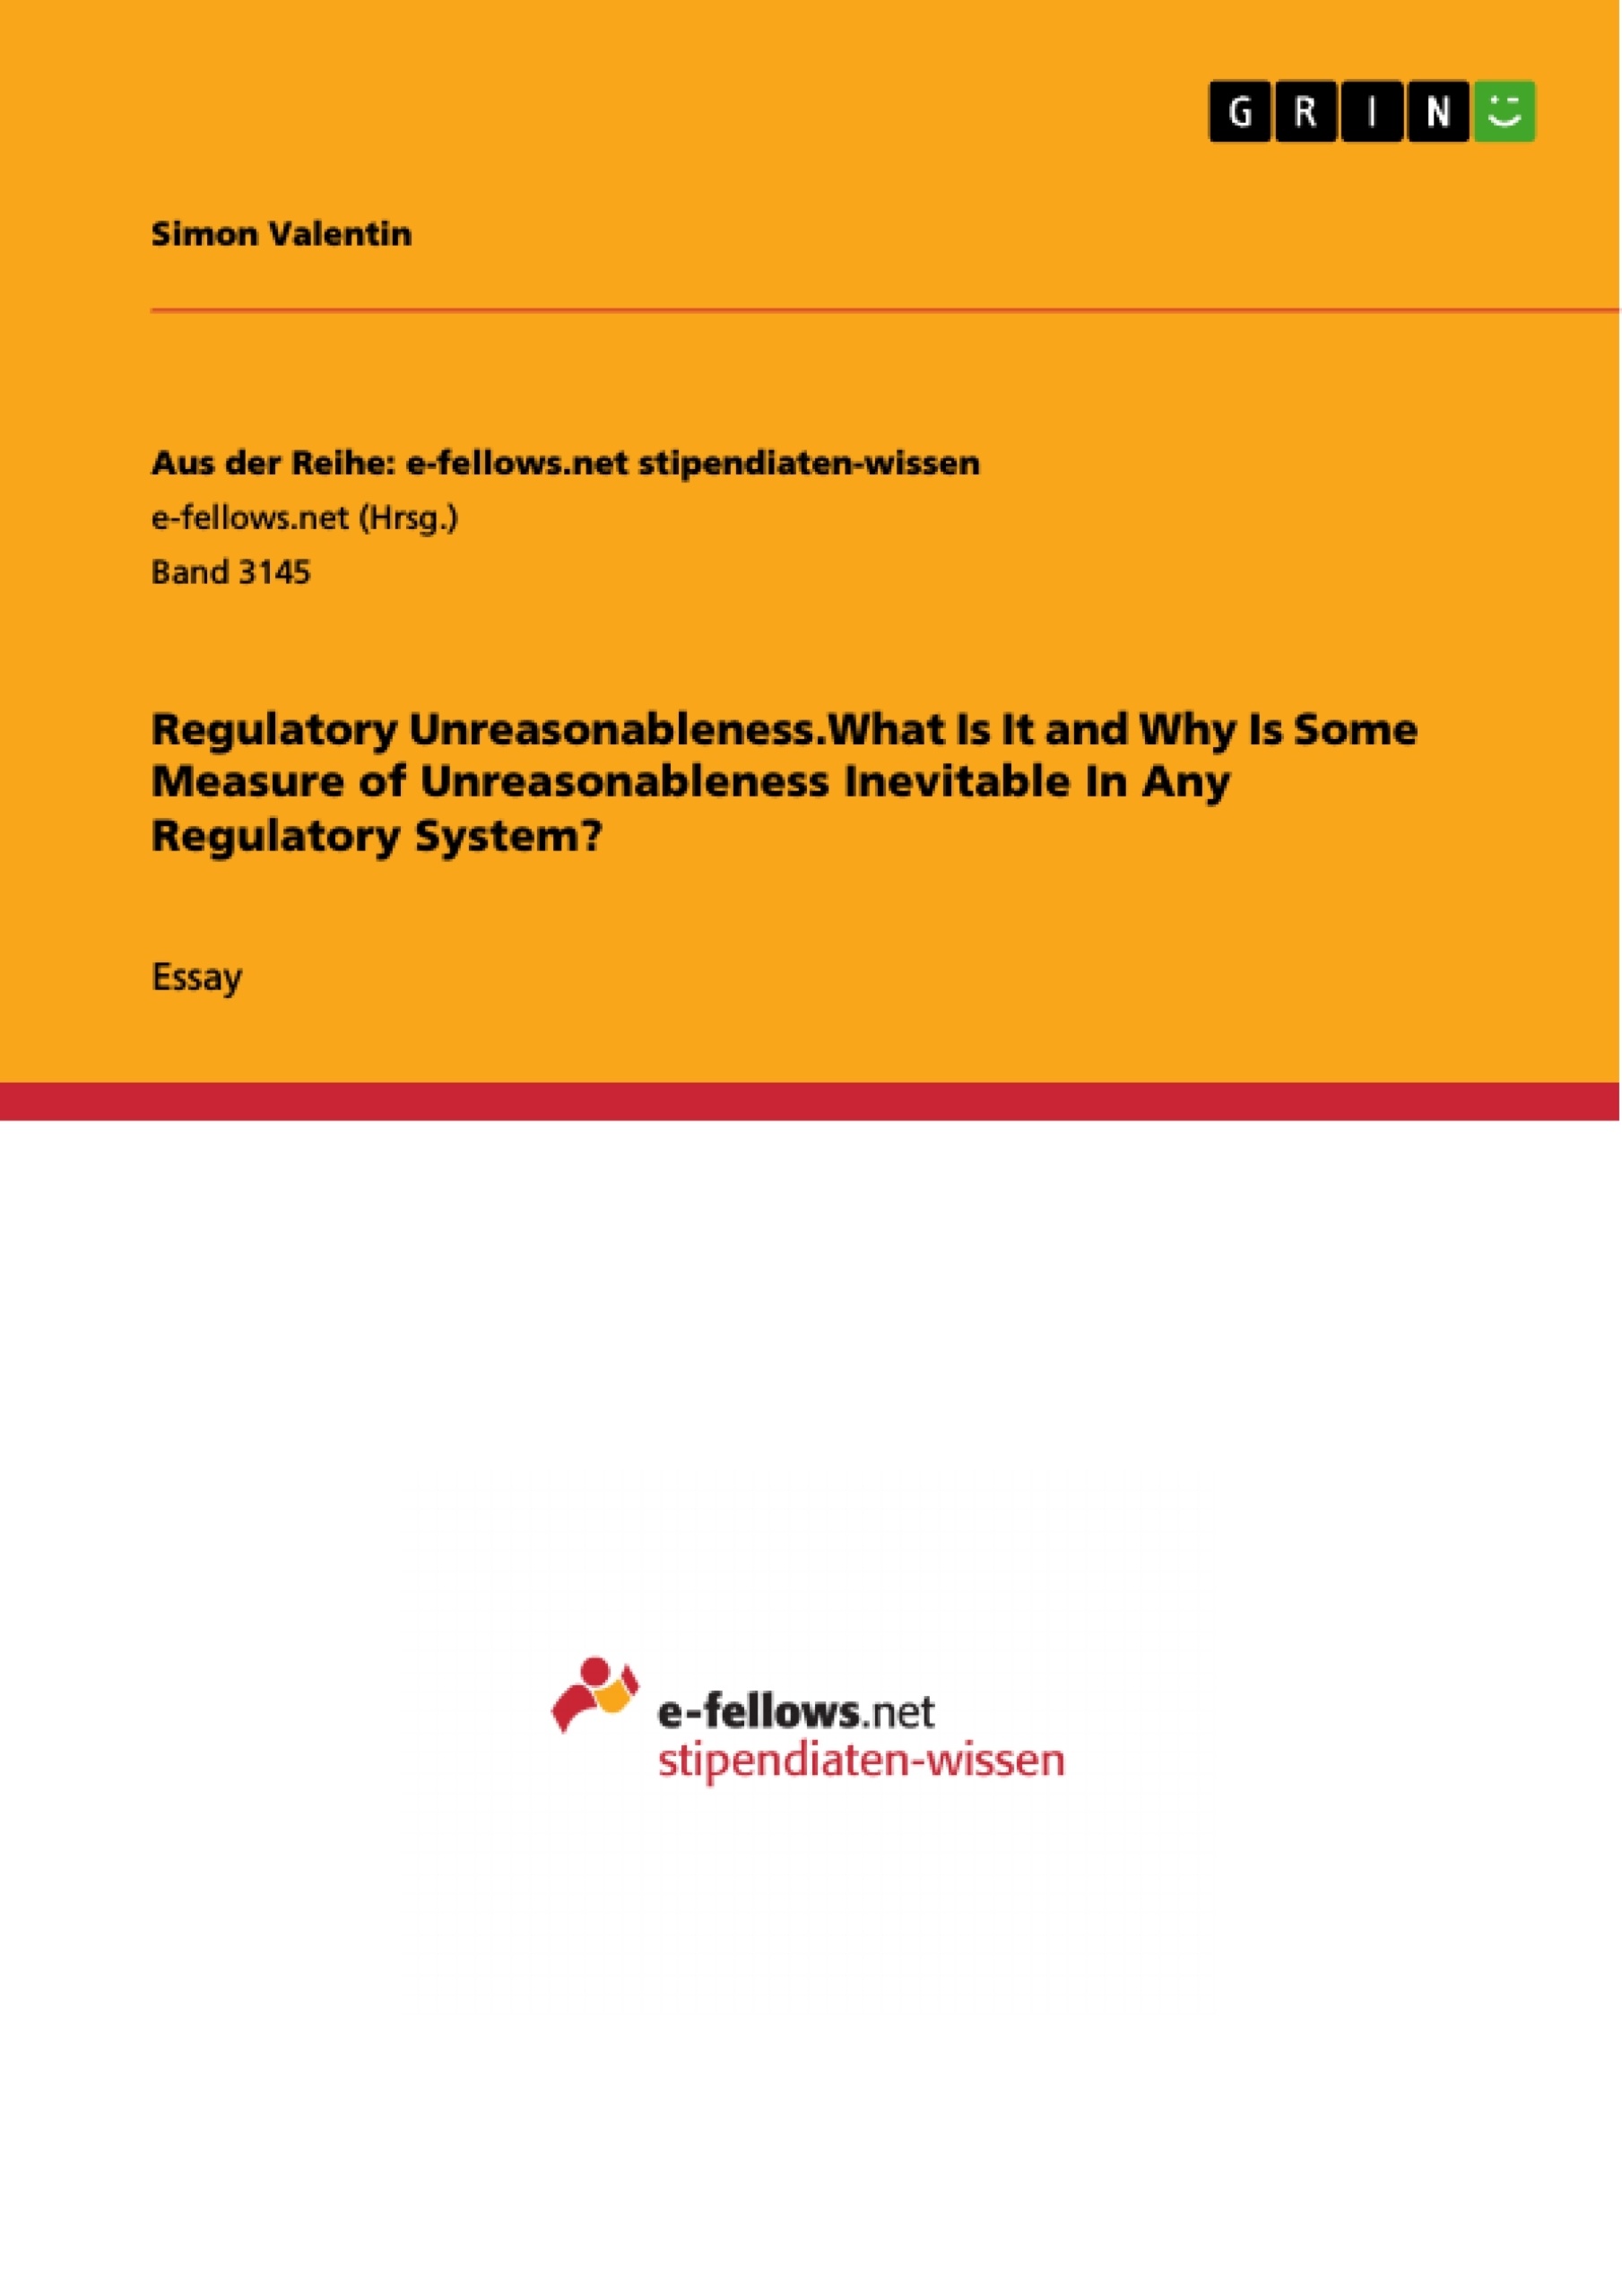 Title: Regulatory Unreasonableness.What Is It and Why Is Some Measure of Unreasonableness Inevitable In Any Regulatory System?